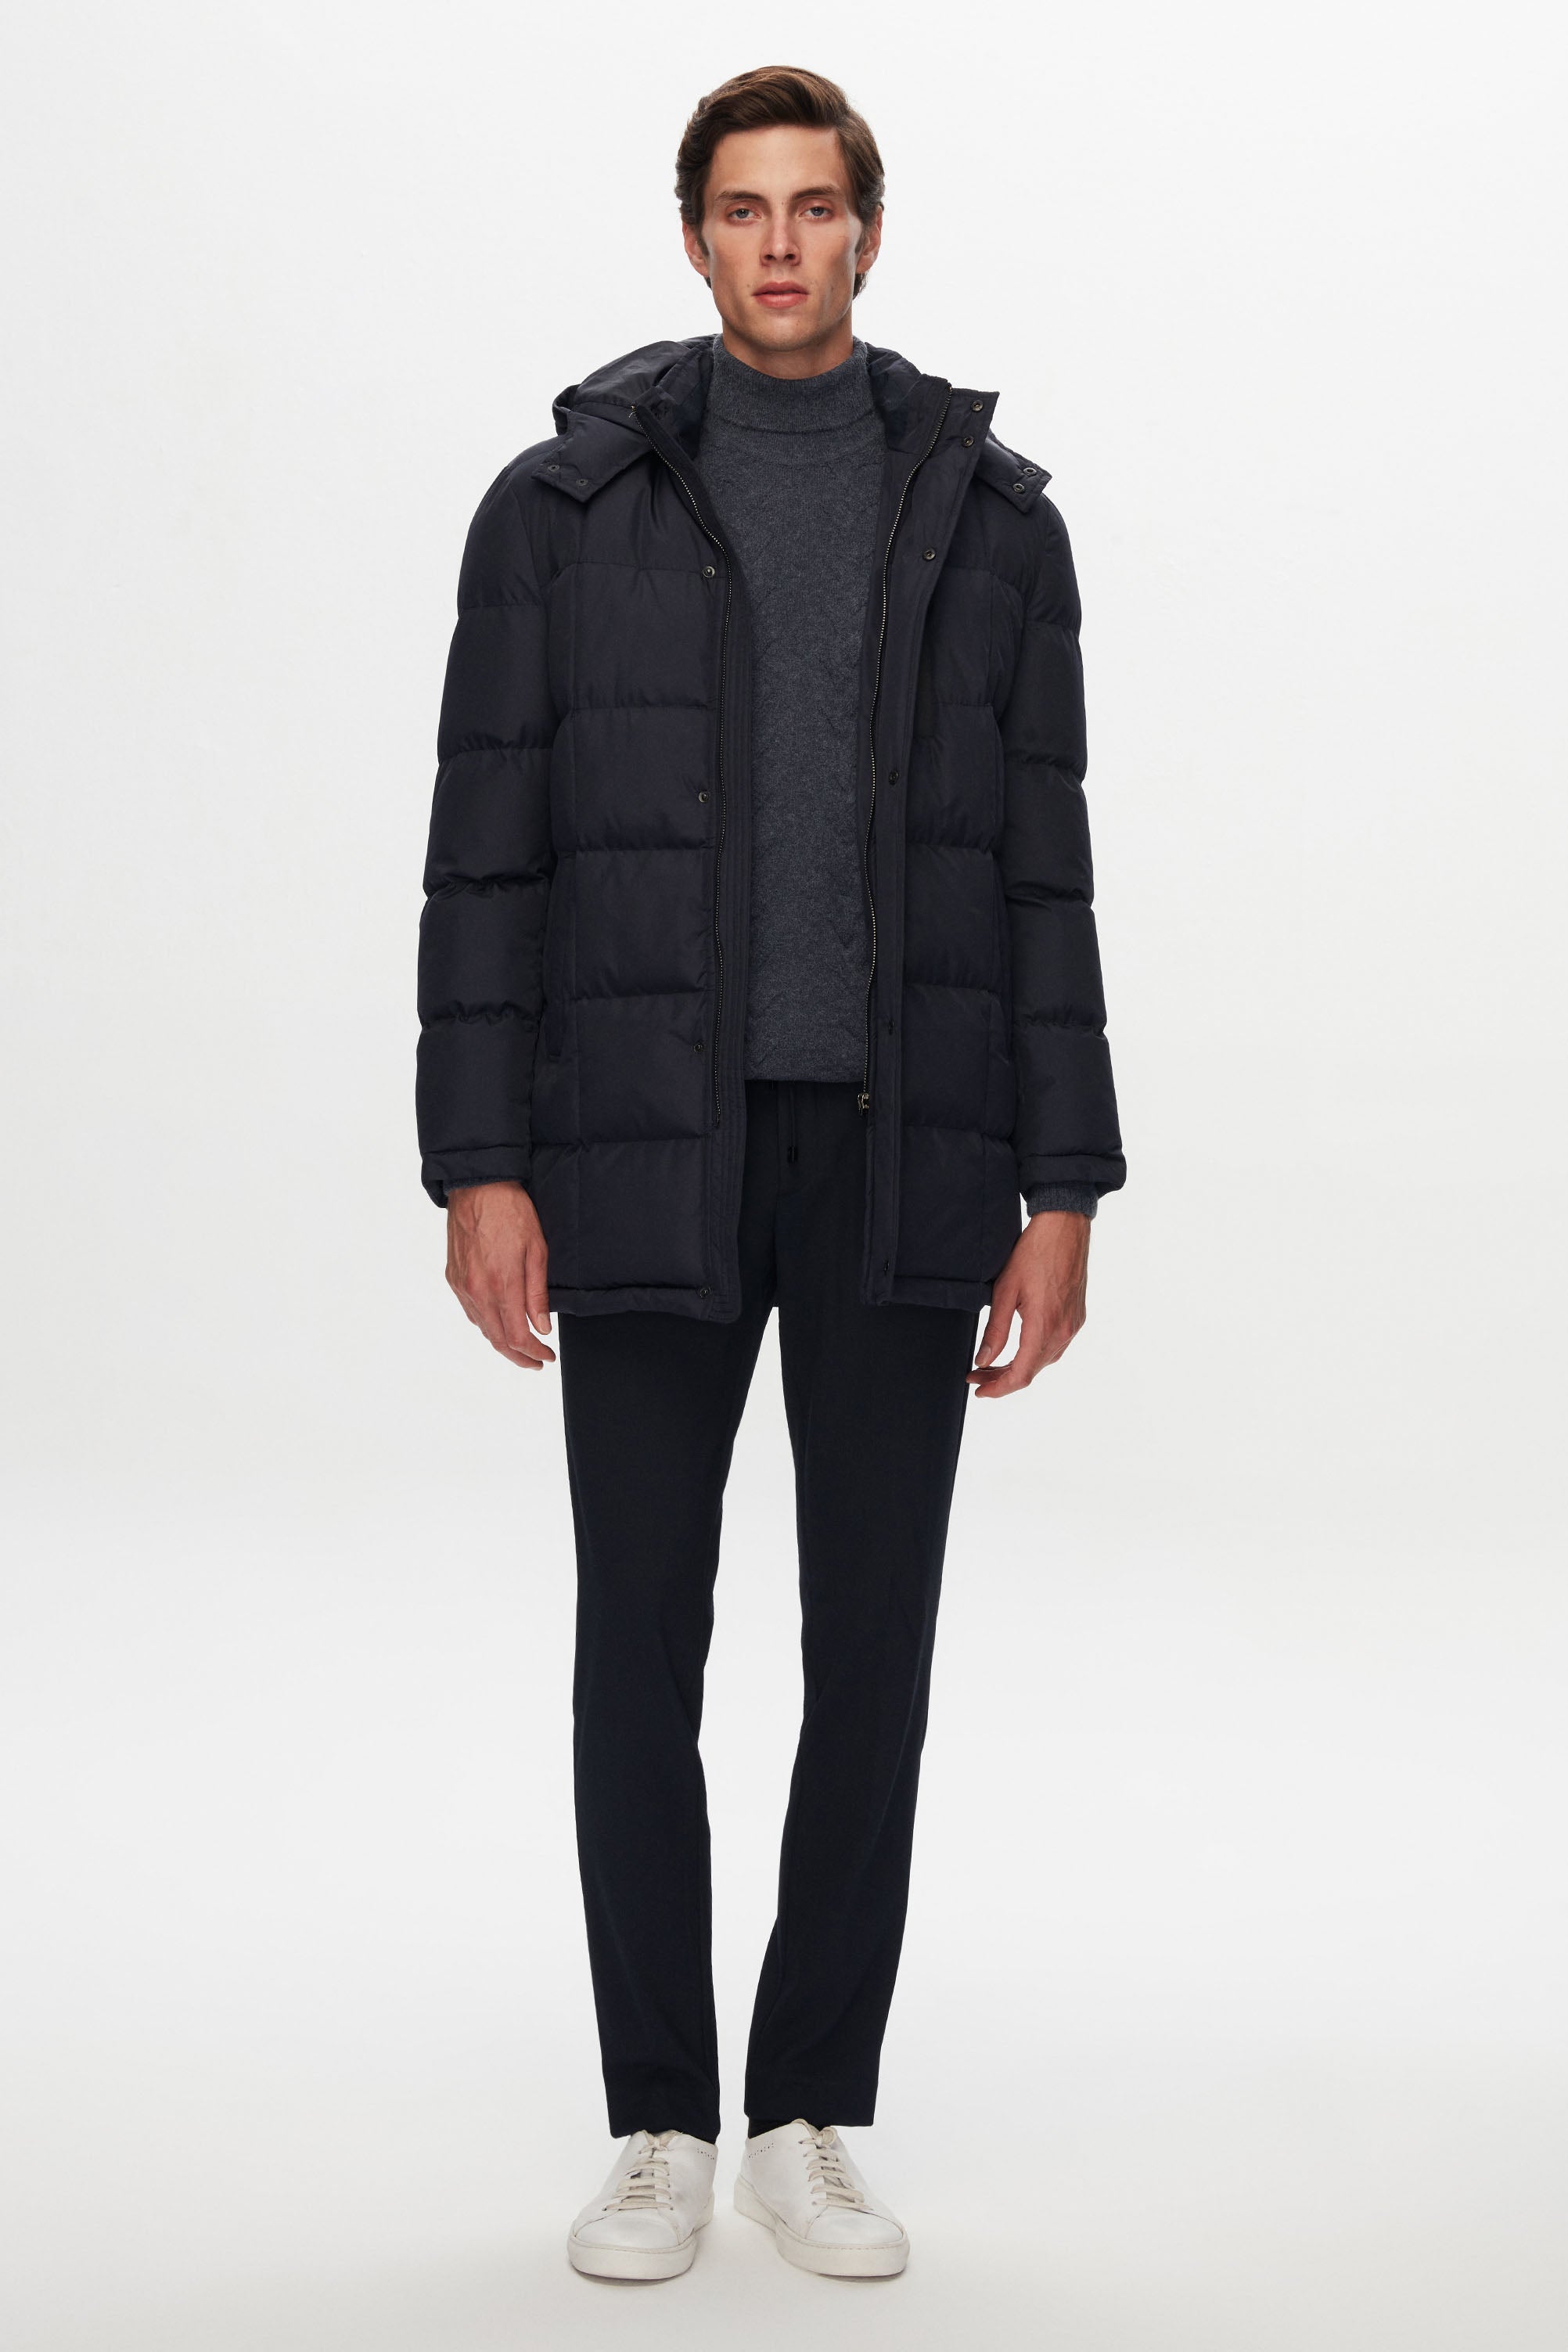 D's Damat Navy Classy Puffer Jacket with Hoodie